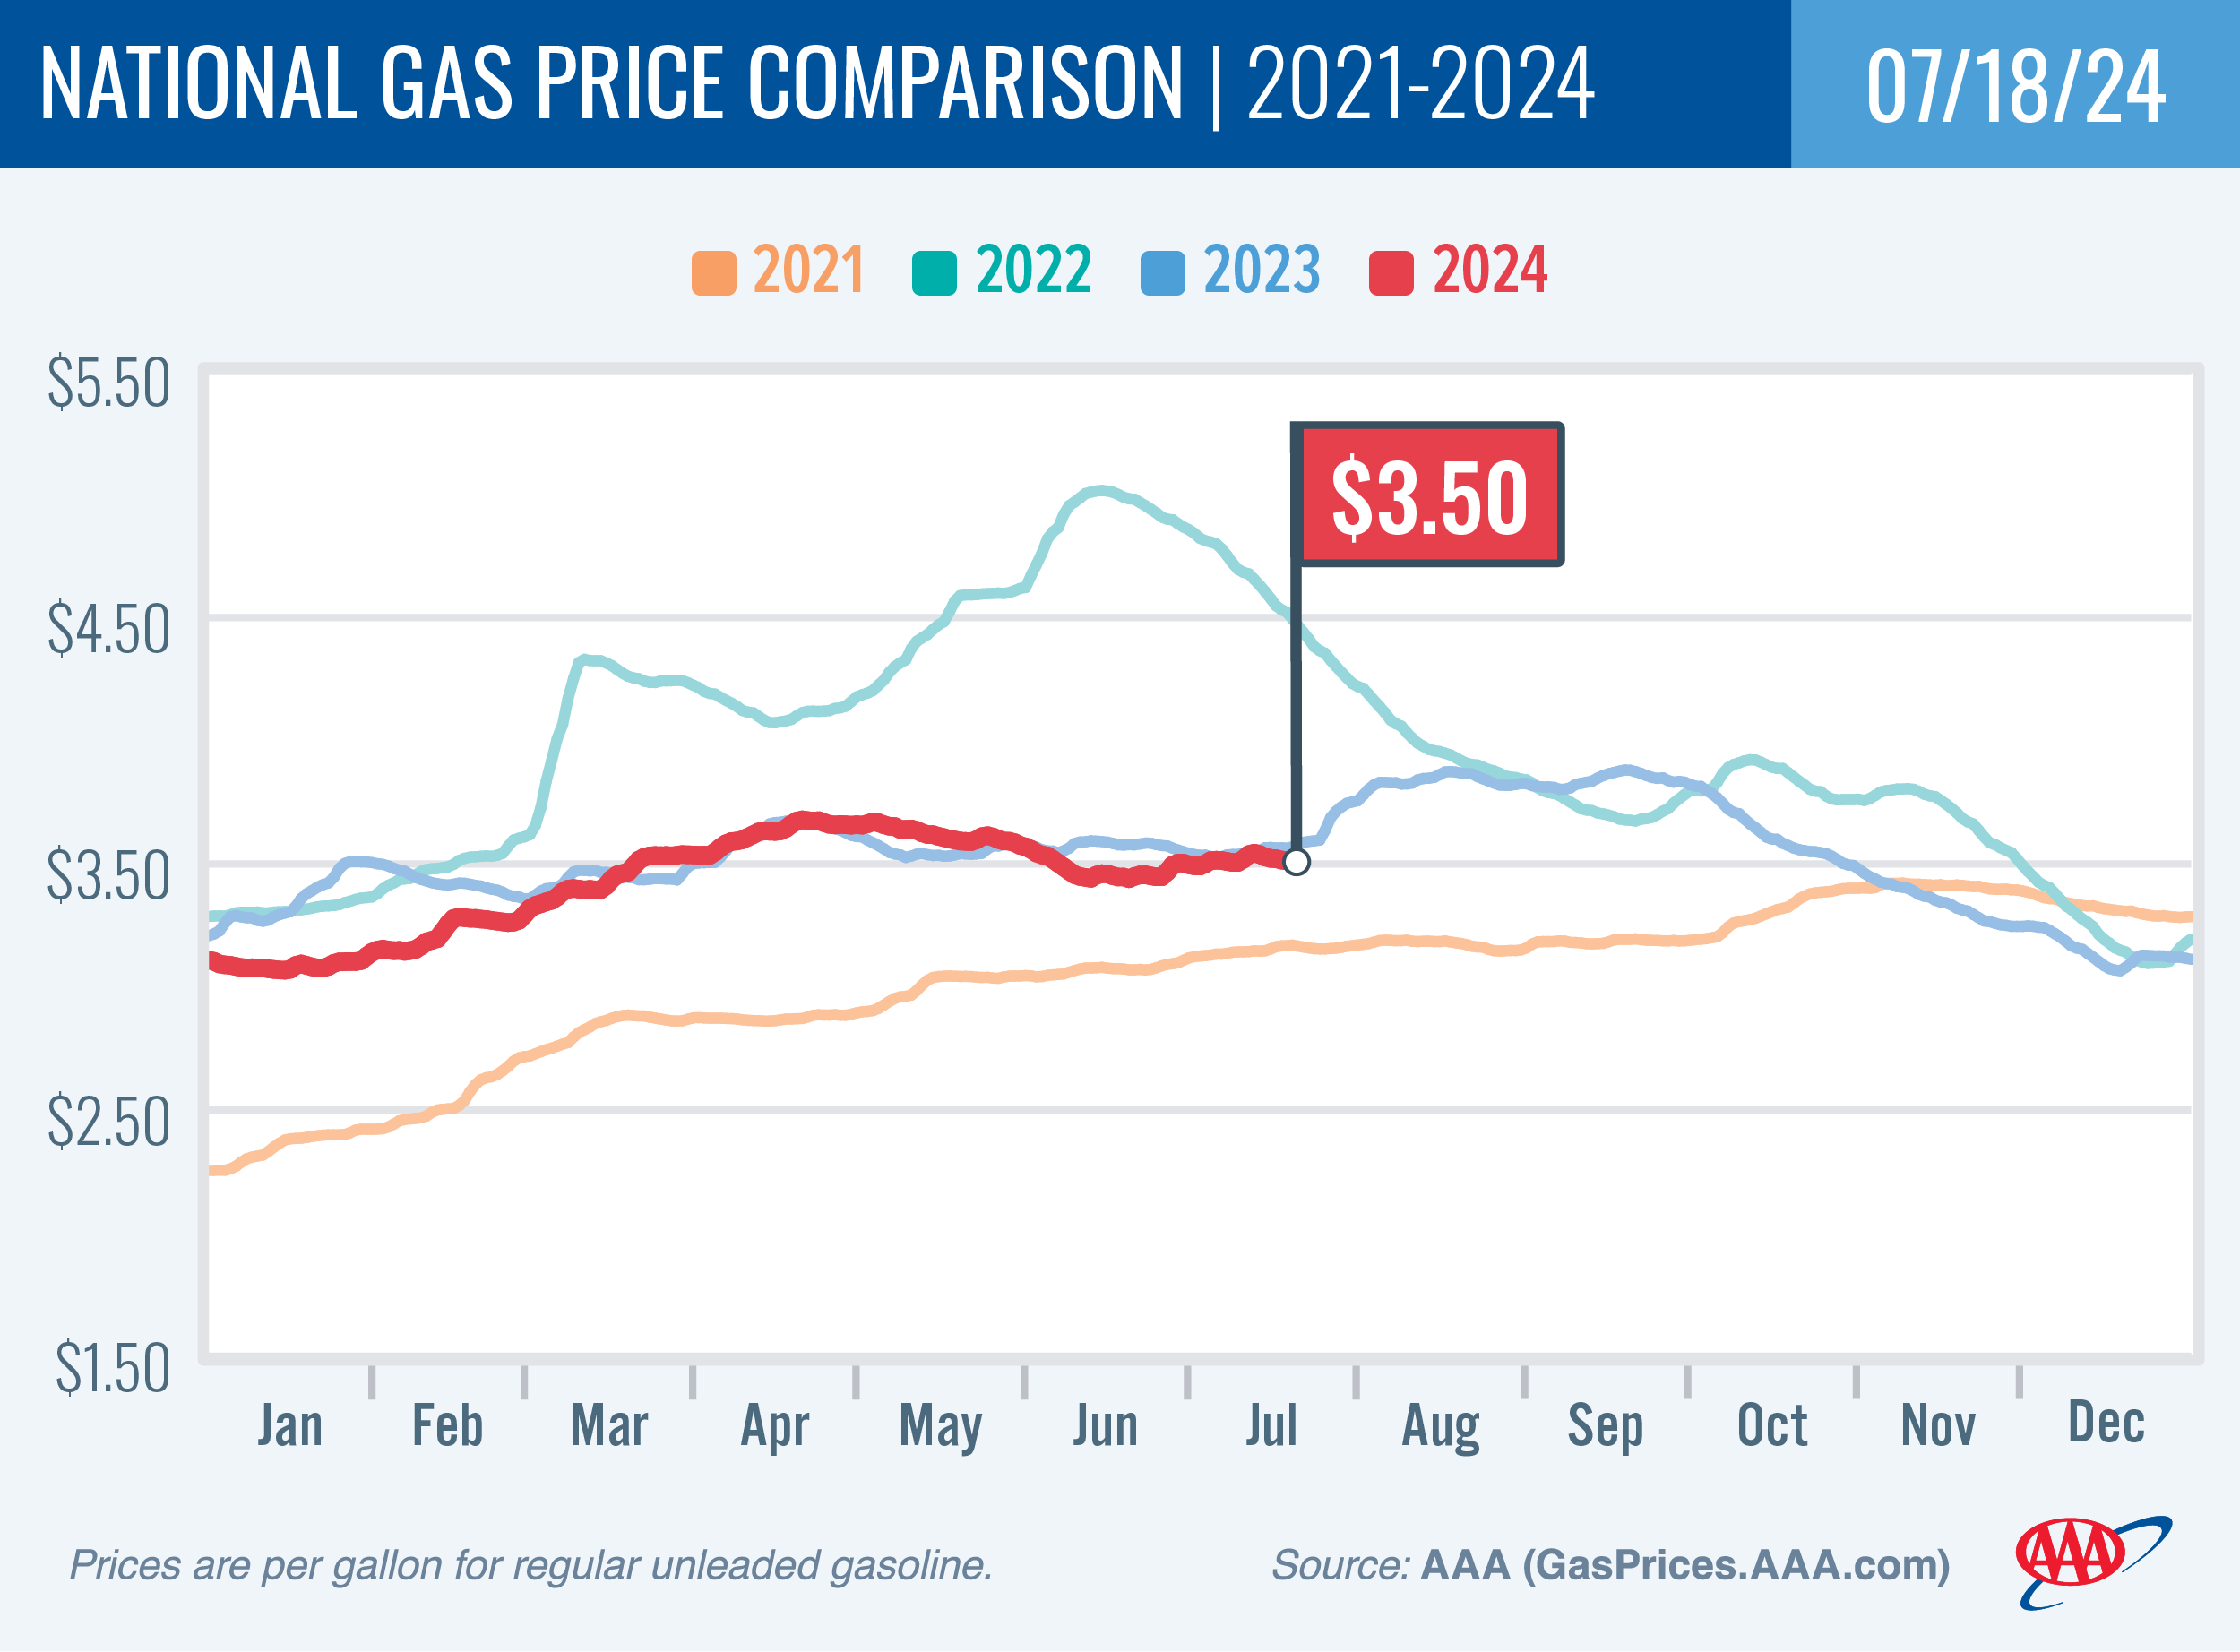 National Gas Price Comparison for July 18, 2024